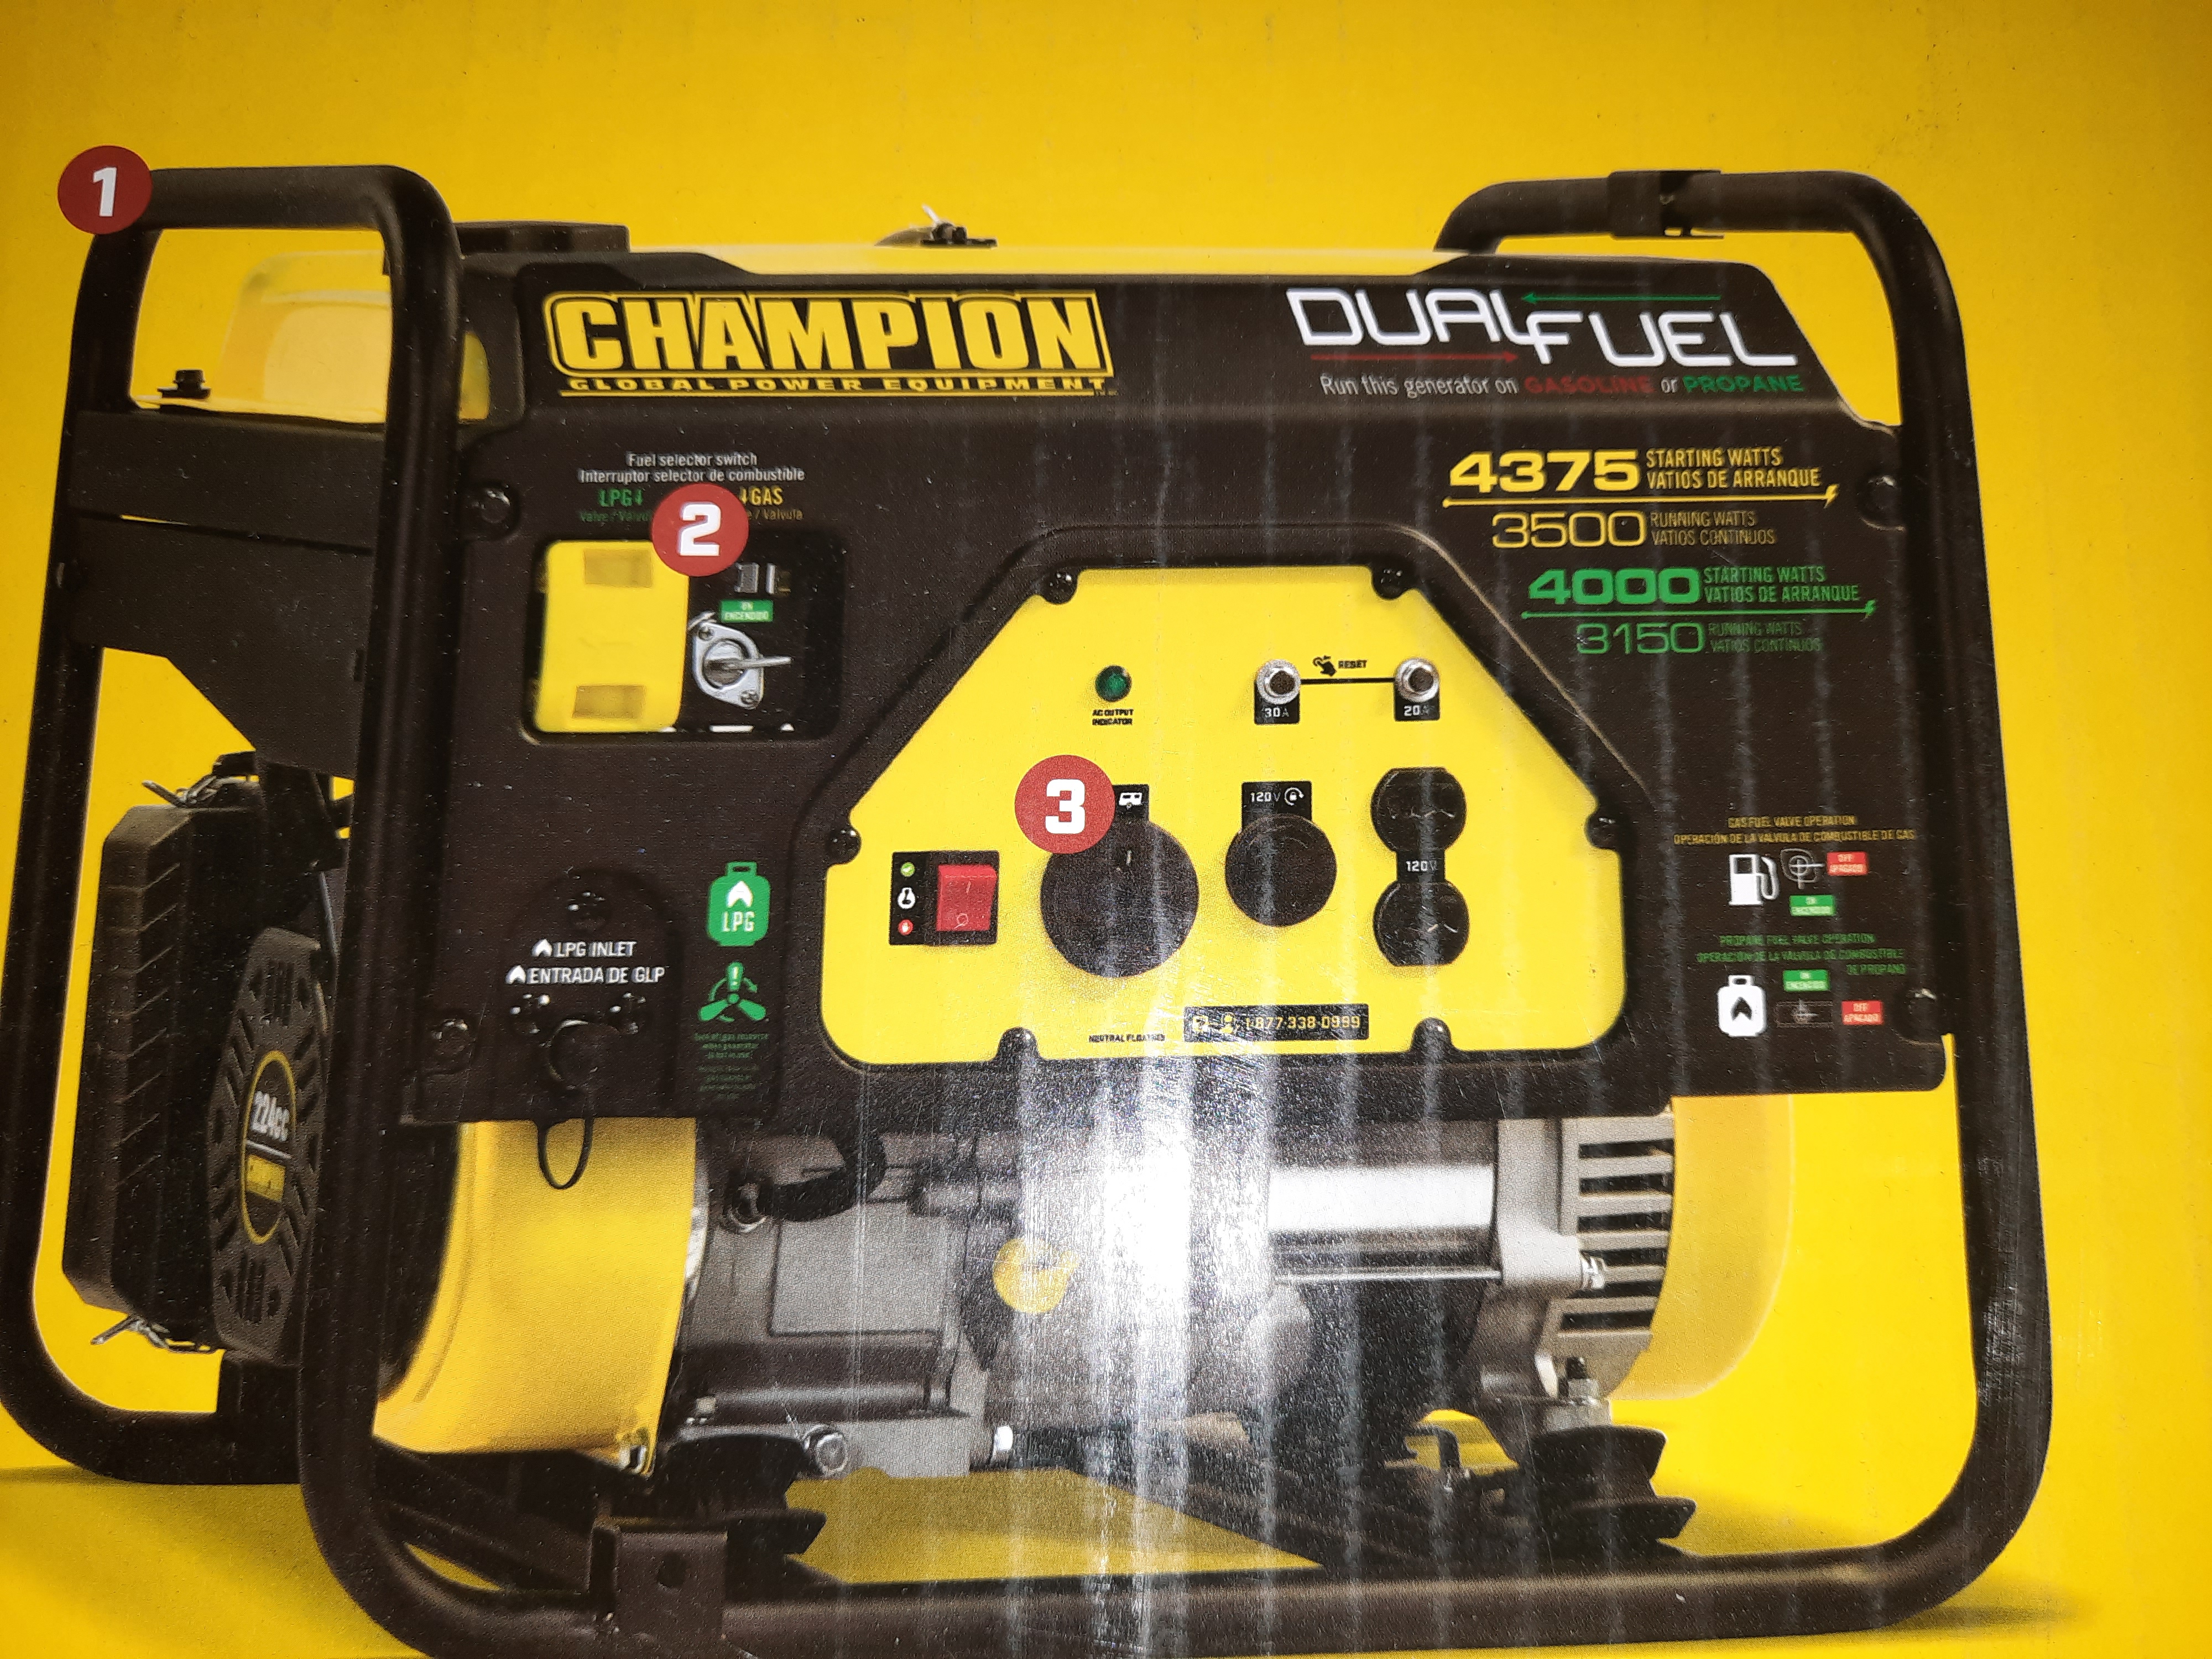 amplifikation stille værdighed Champion Power Equipment Reviews - 501 Reviews of Championpowerequipment.com